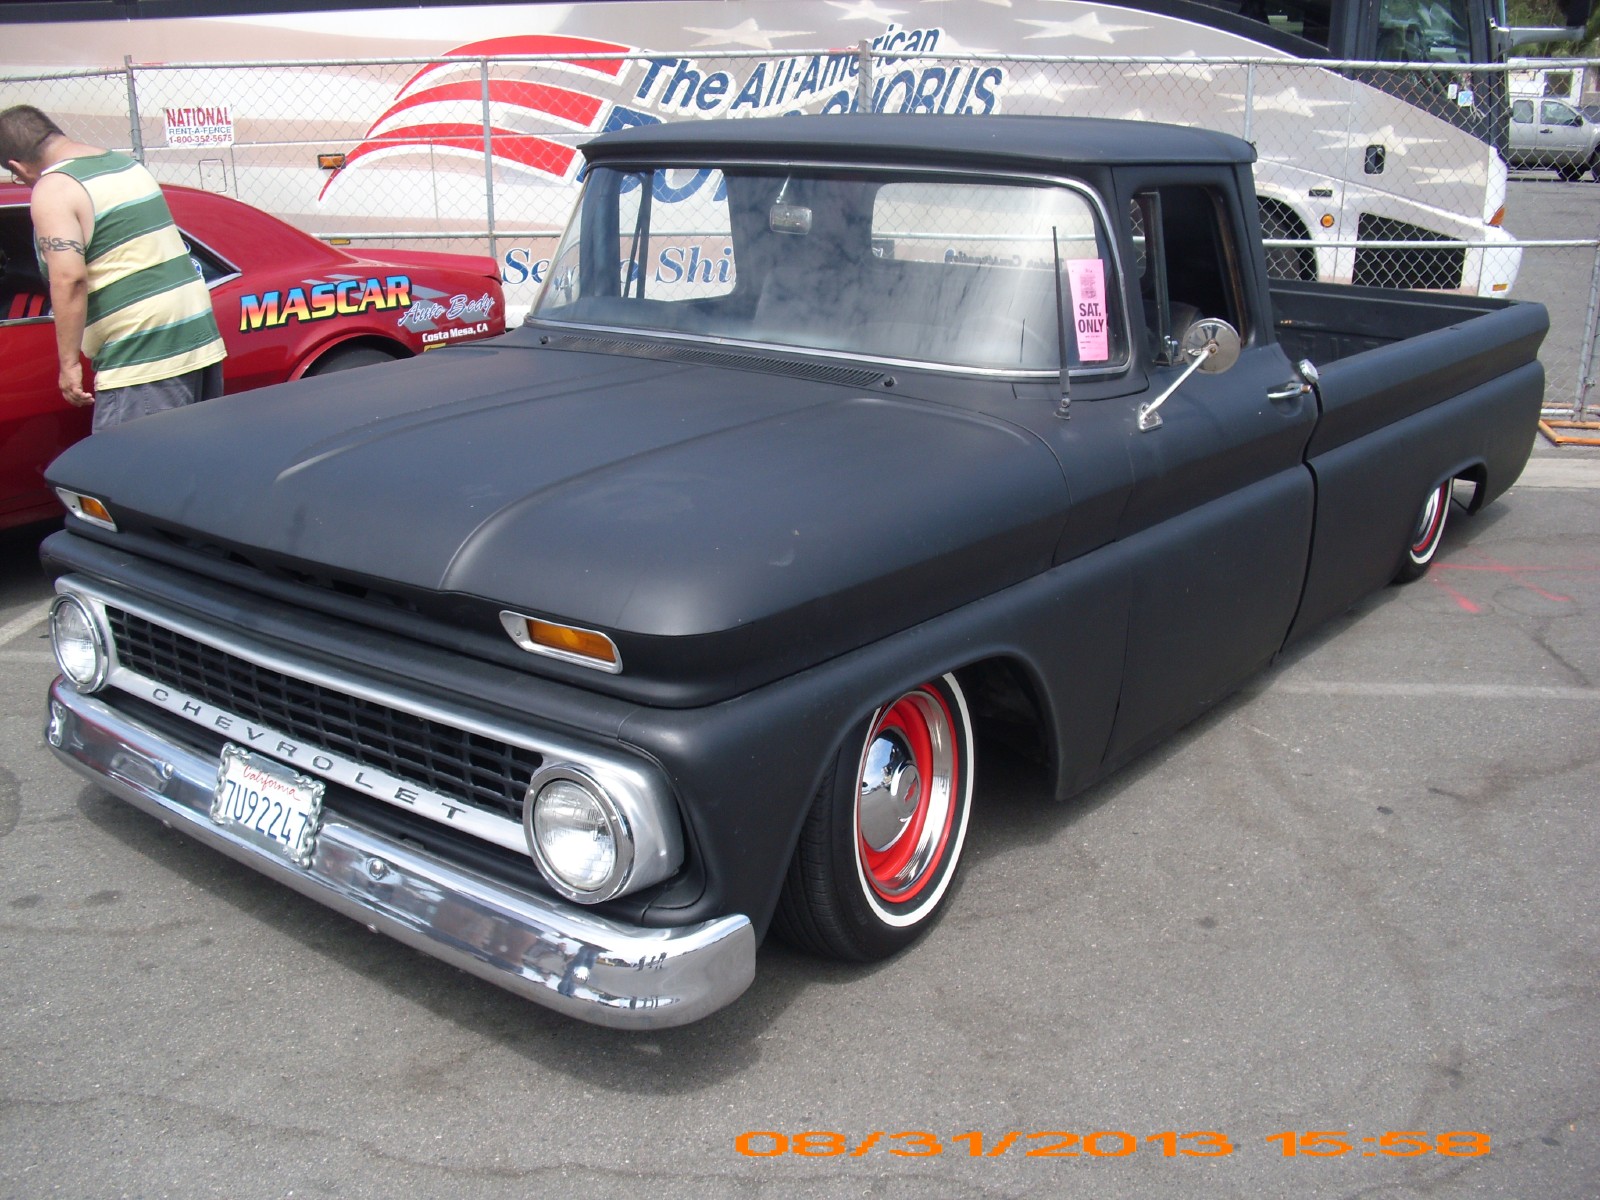 Wallpaper Old Skool Chevy Truck Chevrolet Show Classic Cars